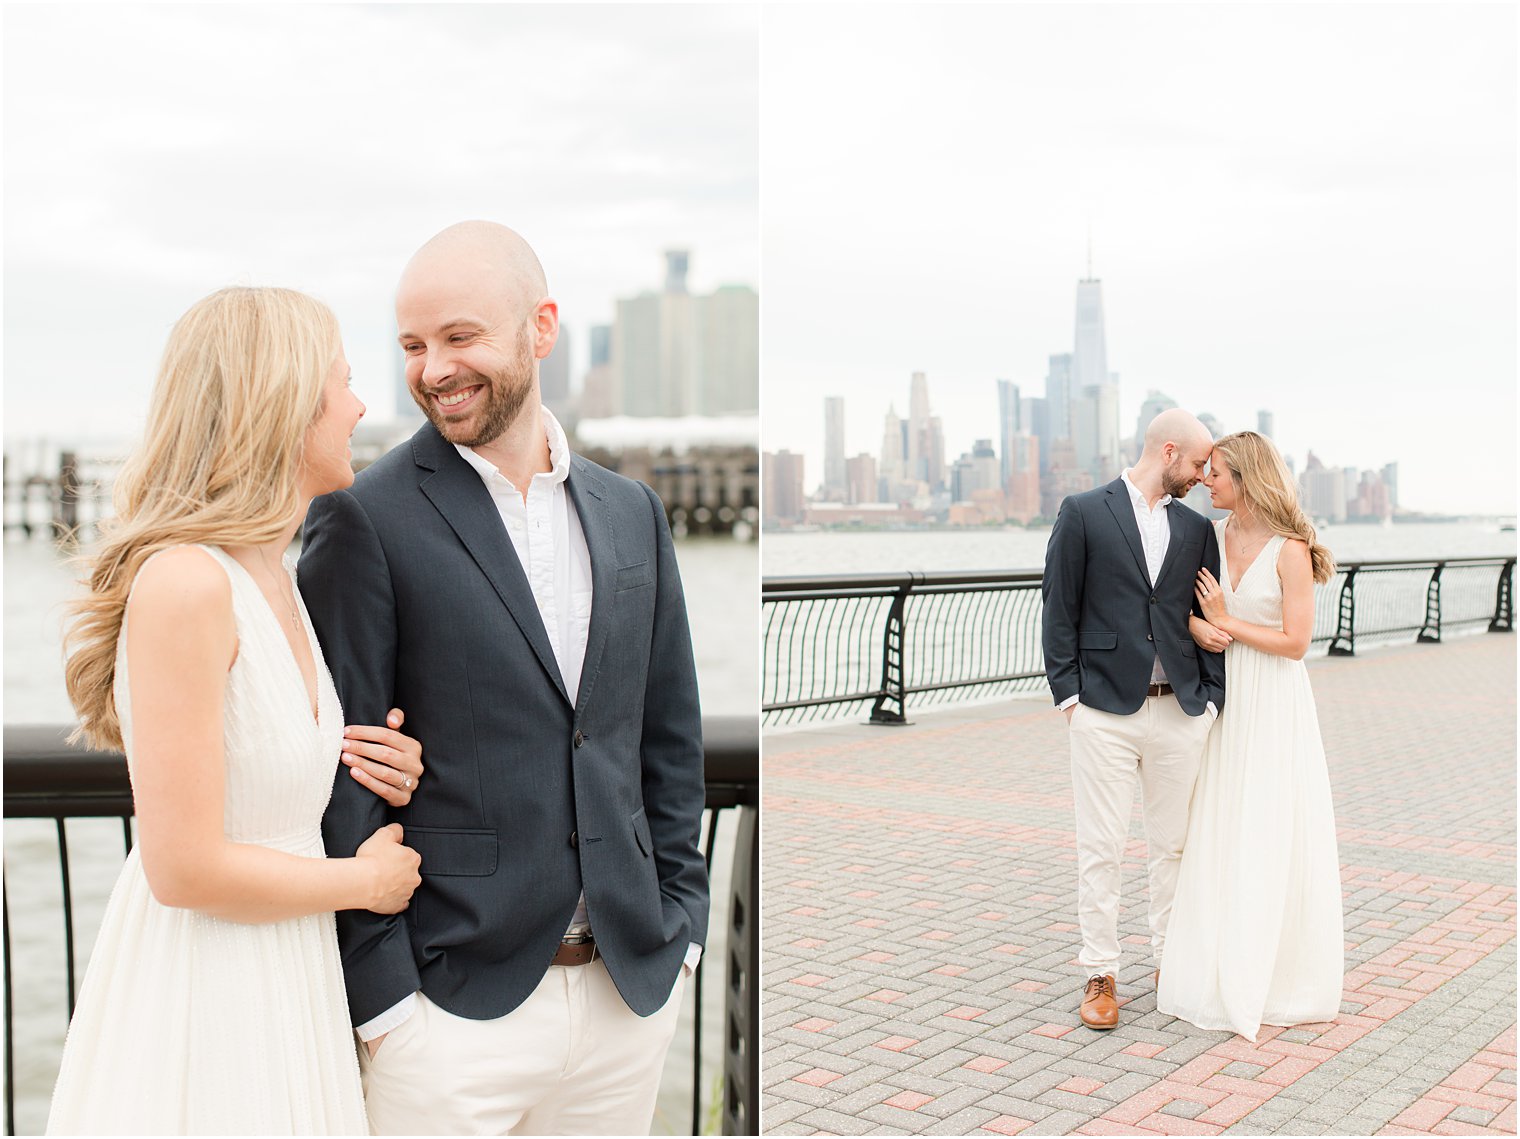 summer Hoboken engagement session along waterfront for bride in white dress and groom in suit jacket